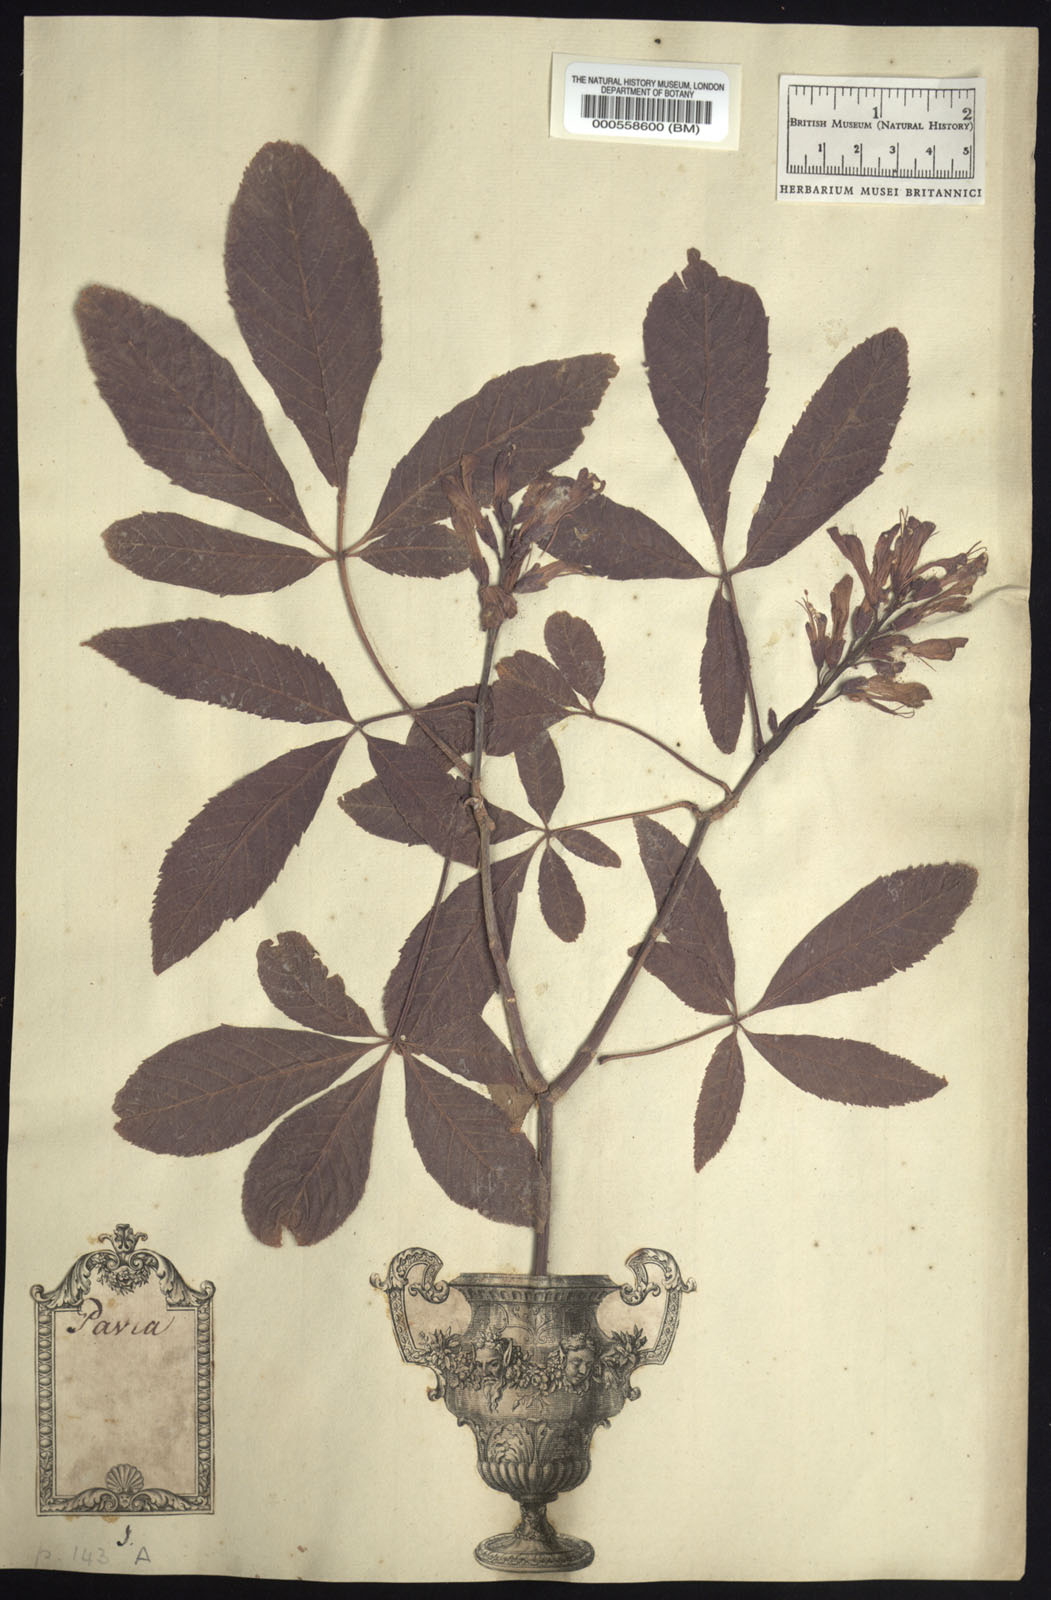 https://www.nhm.ac.uk//resources/research-curation/projects/clifford-herbarium/lgimages/BM000558600.JPG